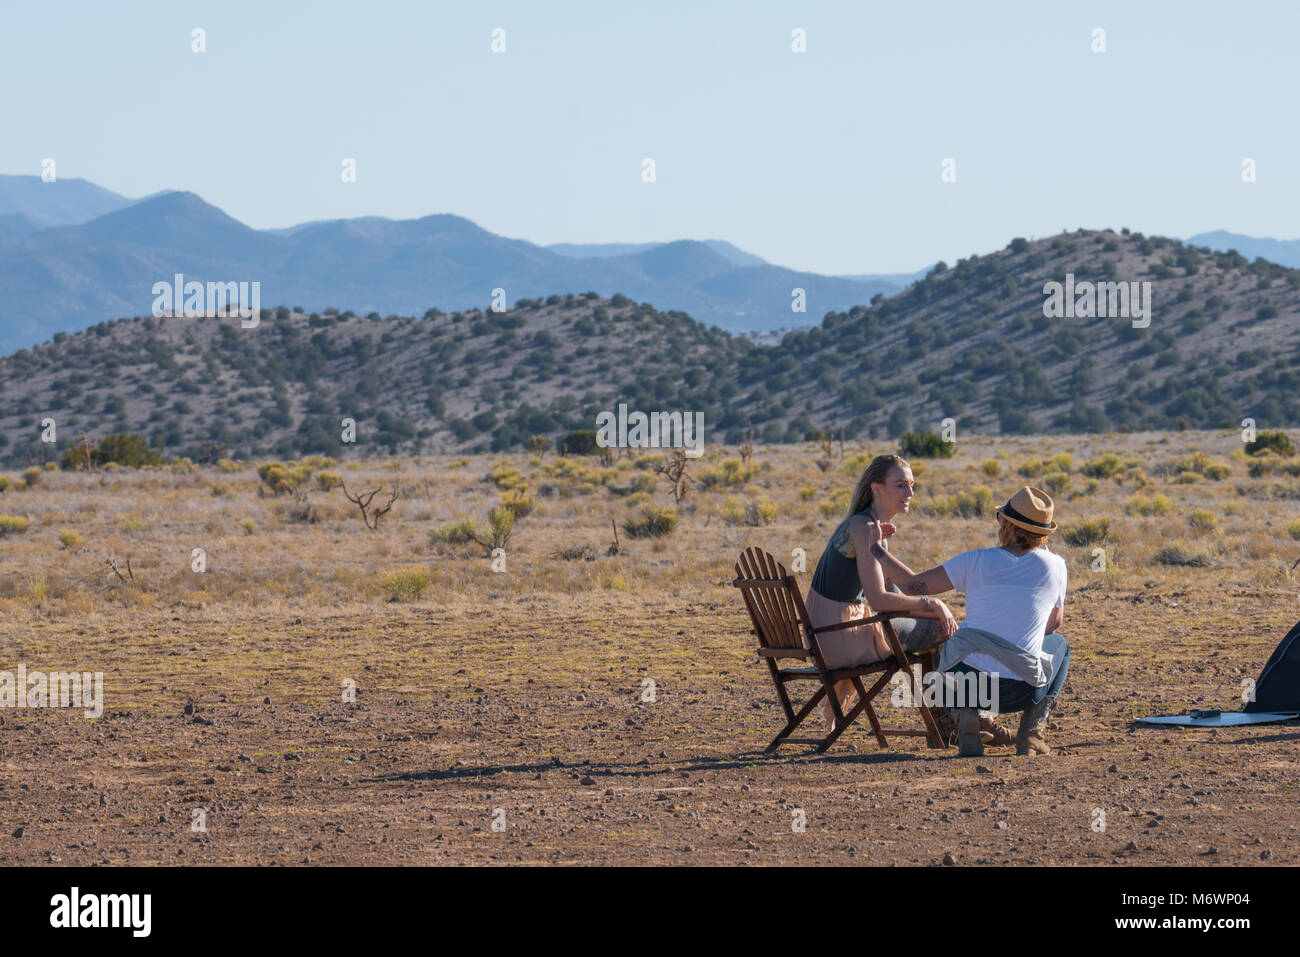 Two women talk while on a photography set in Santa Fe, New mexico on the high desert. Stock Photo